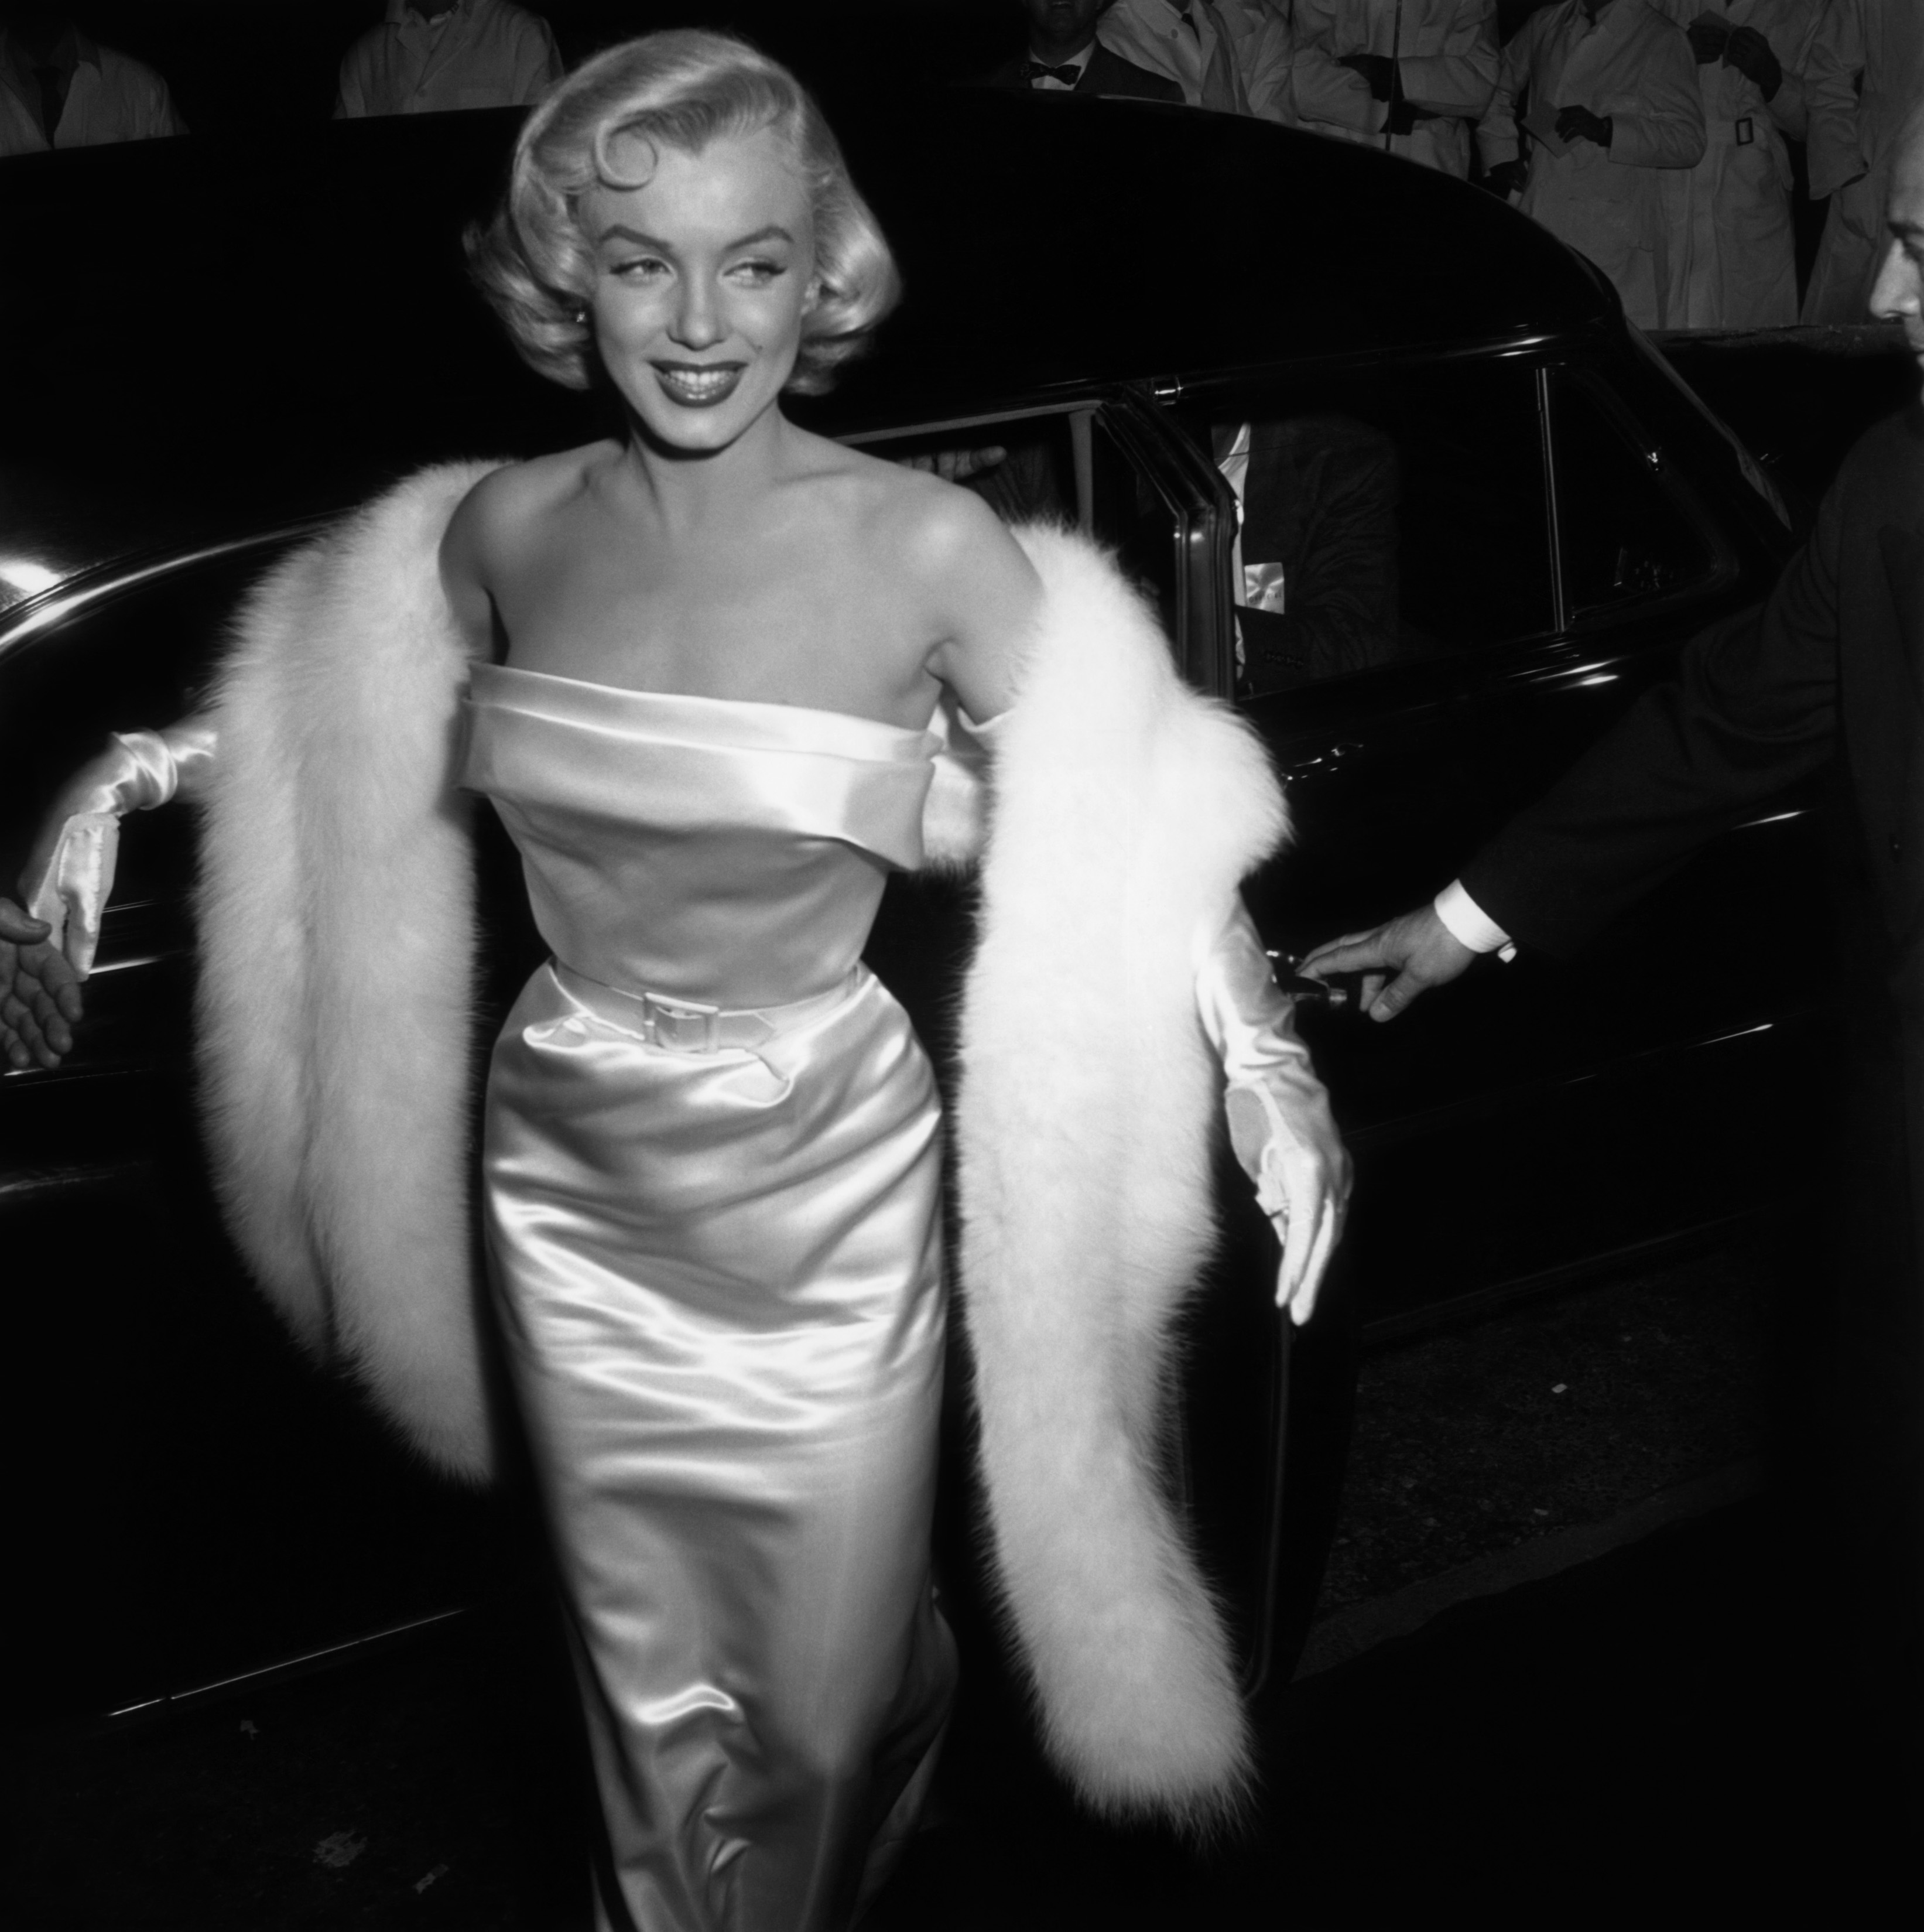 Marilyn Monroe arriving at the premiere of "There's No Business like Show Business" in 1954. | Source: Getty Images